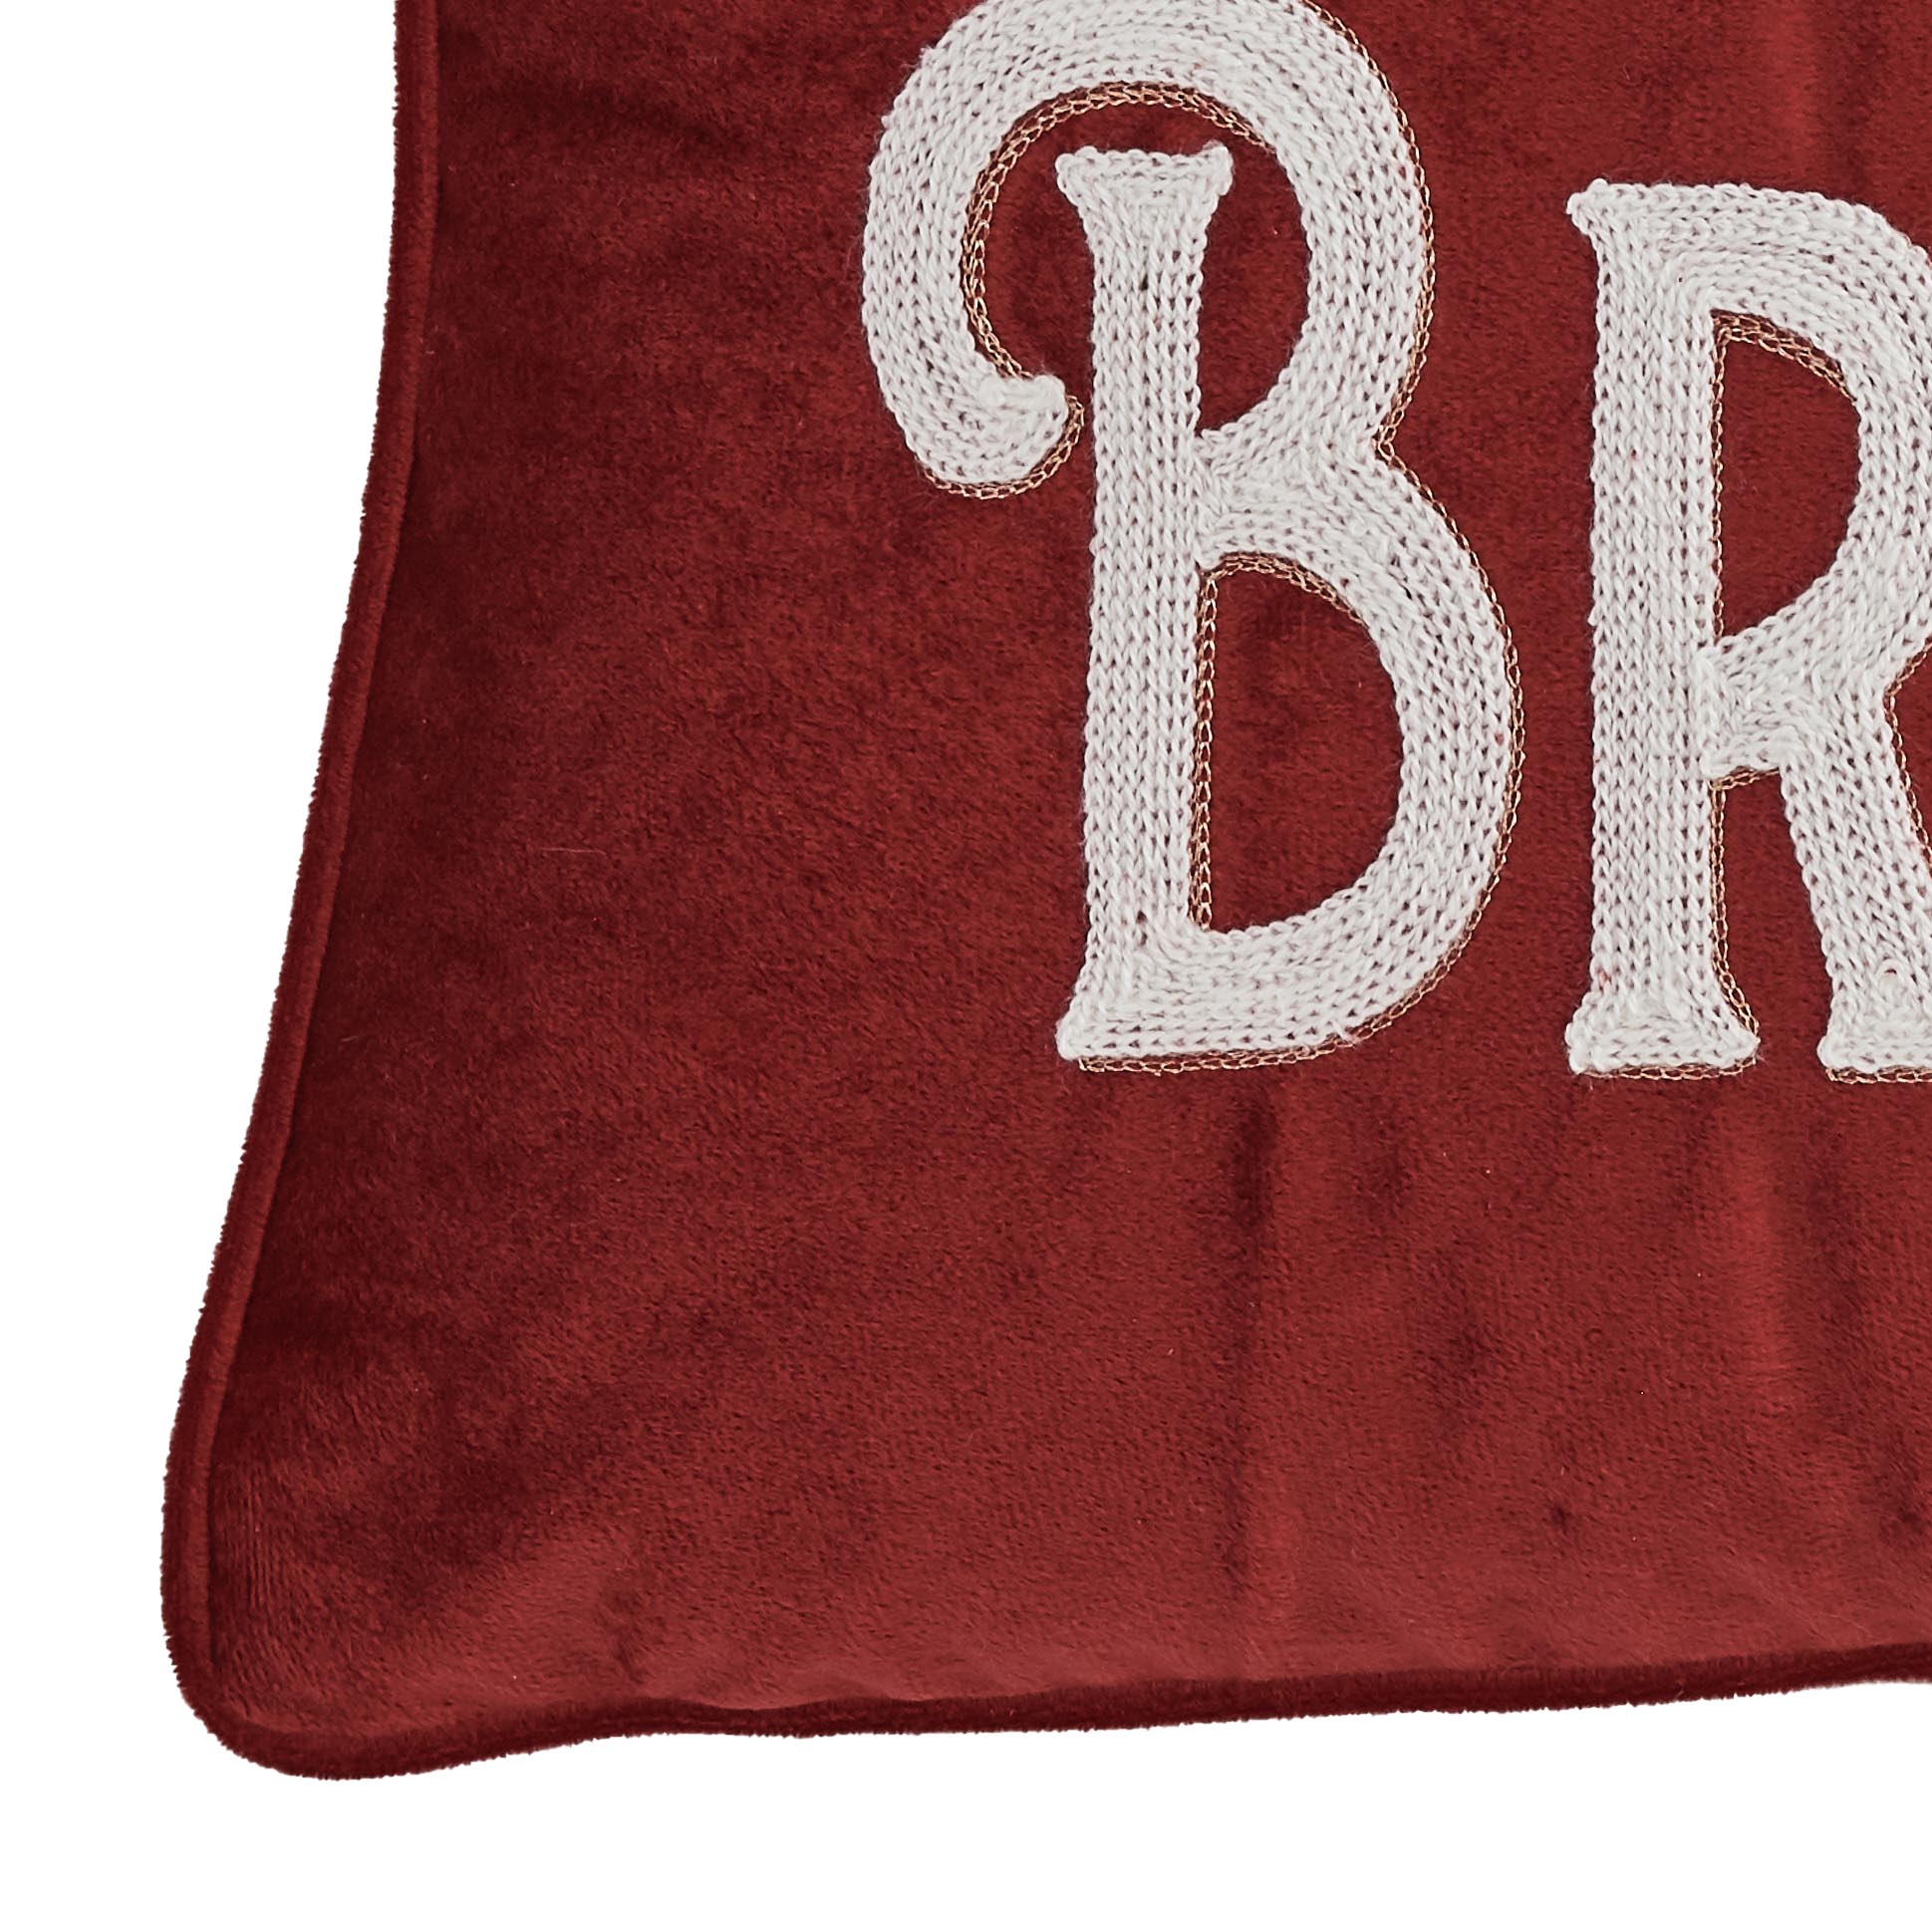 Mainstays Merry and Bright Decorative Throw Pillow, 18”x18” - image 3 of 4